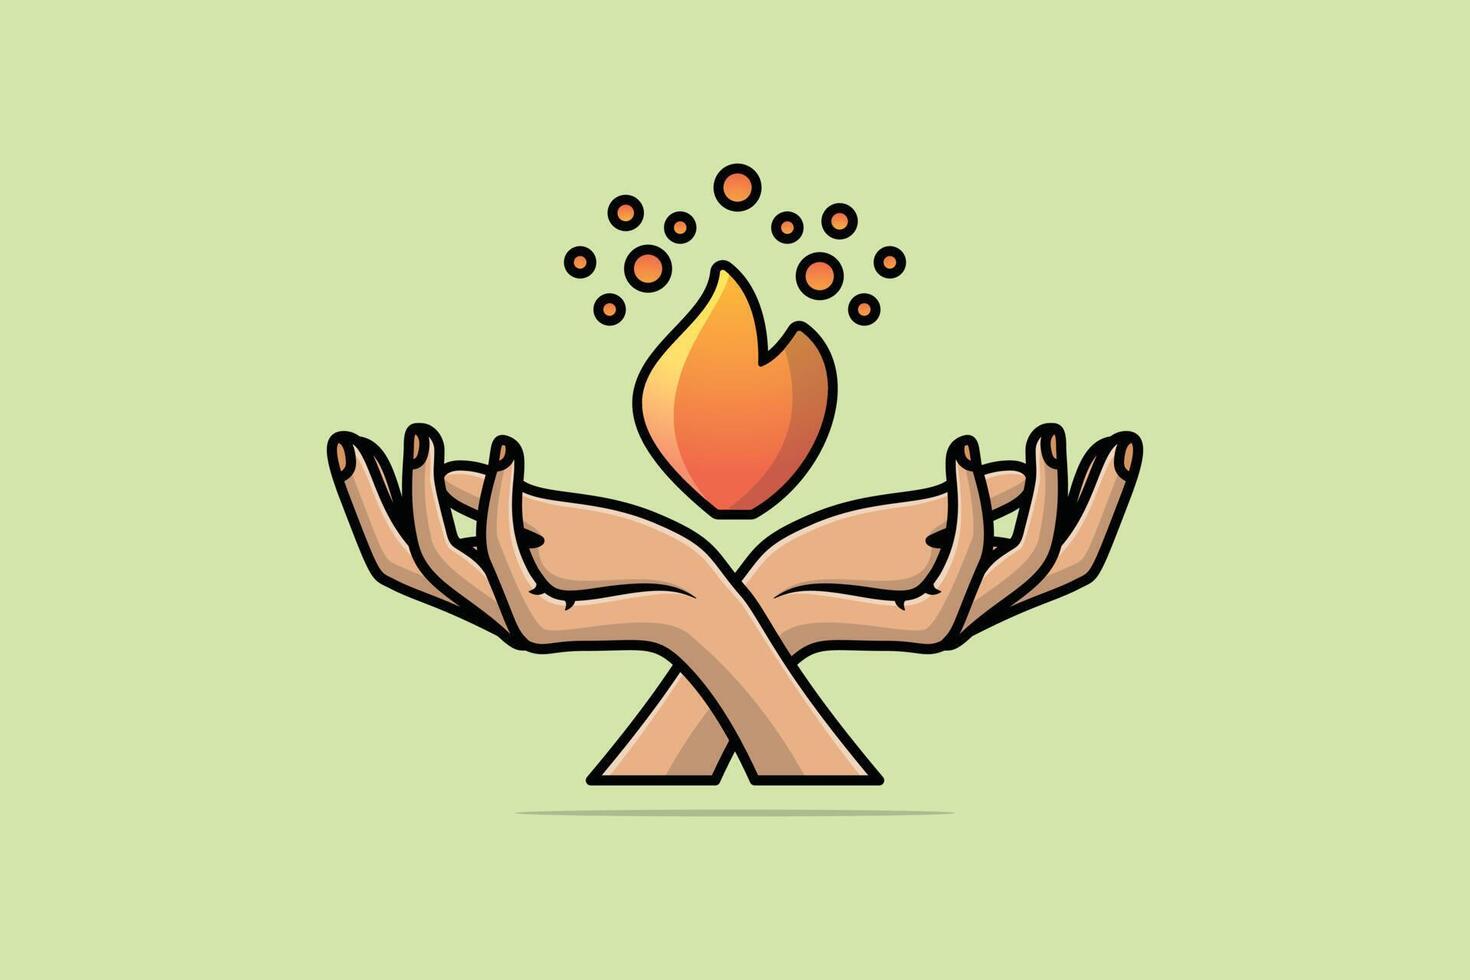 Campfire in Two Hands vector illustration. Holy spirit and energy icon concept. Creative hand and fire icon logo.